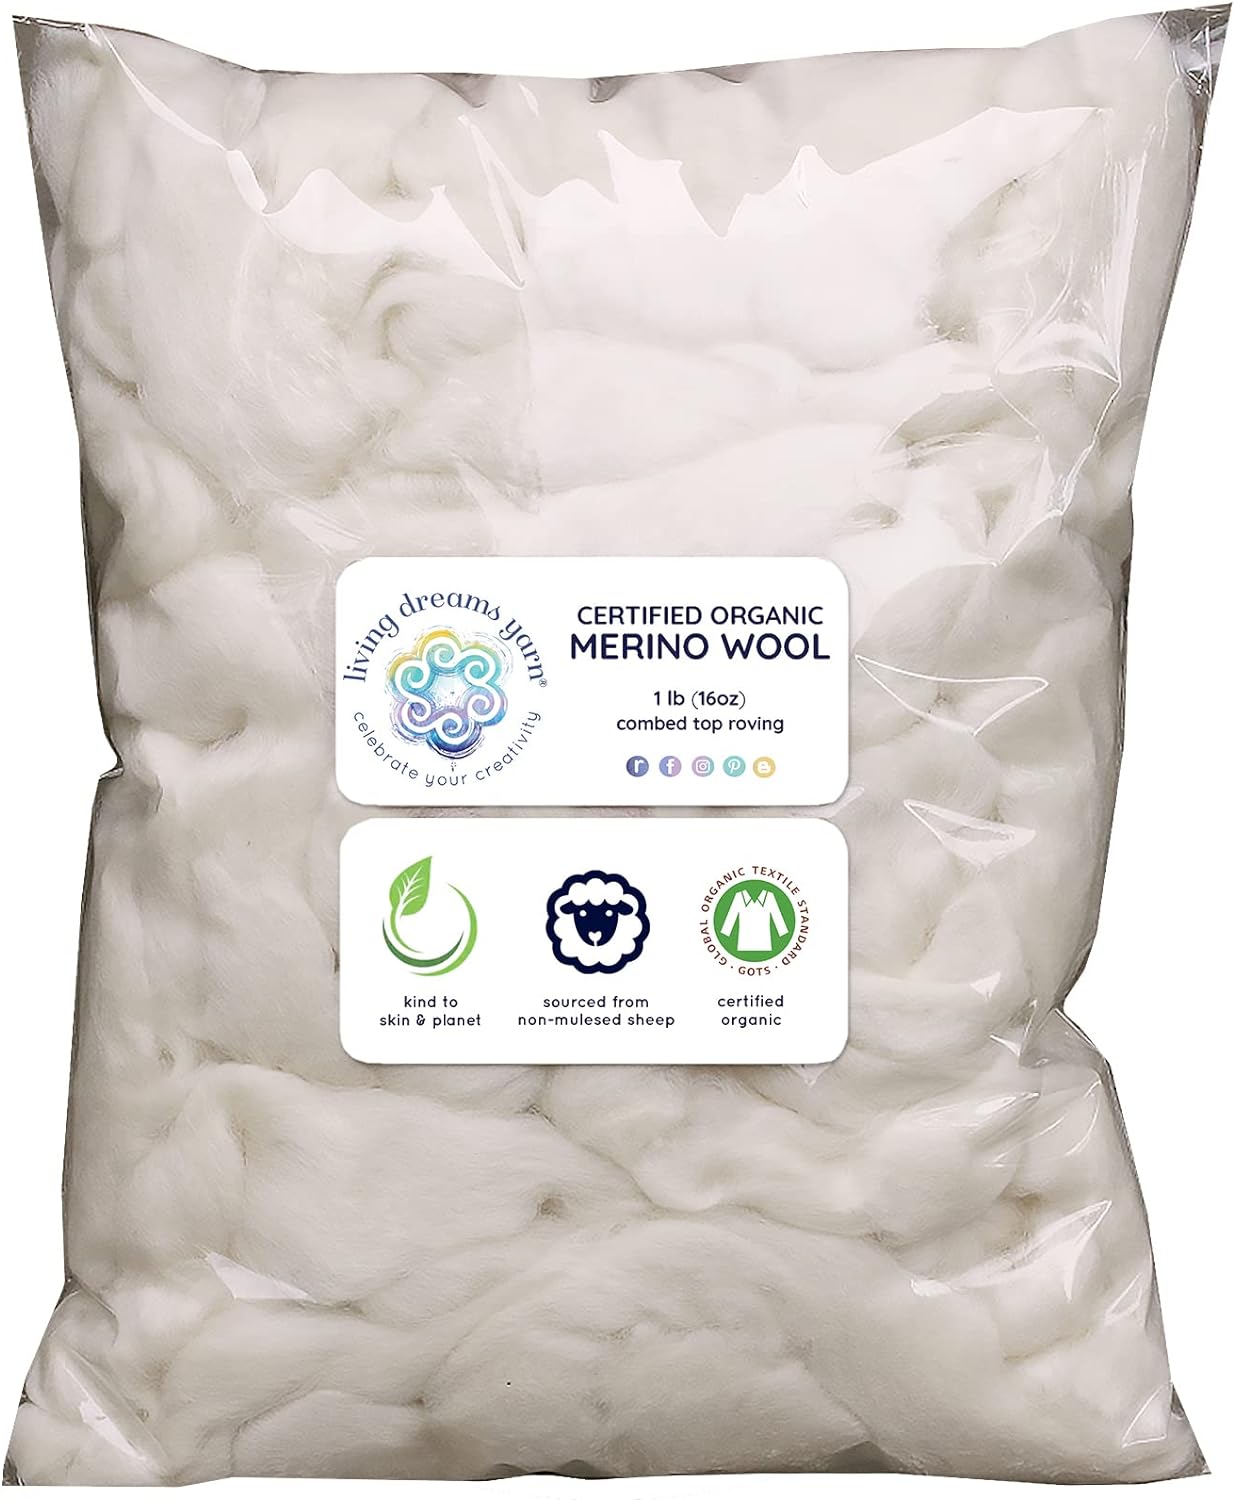 CERTIFIED ORGANIC MERINO Wool Roving. Ethically &#x26; Responsibly Sourced Combed Top Fiber. Spinning, Felting, Filling - 1 lb Bag, Natural White